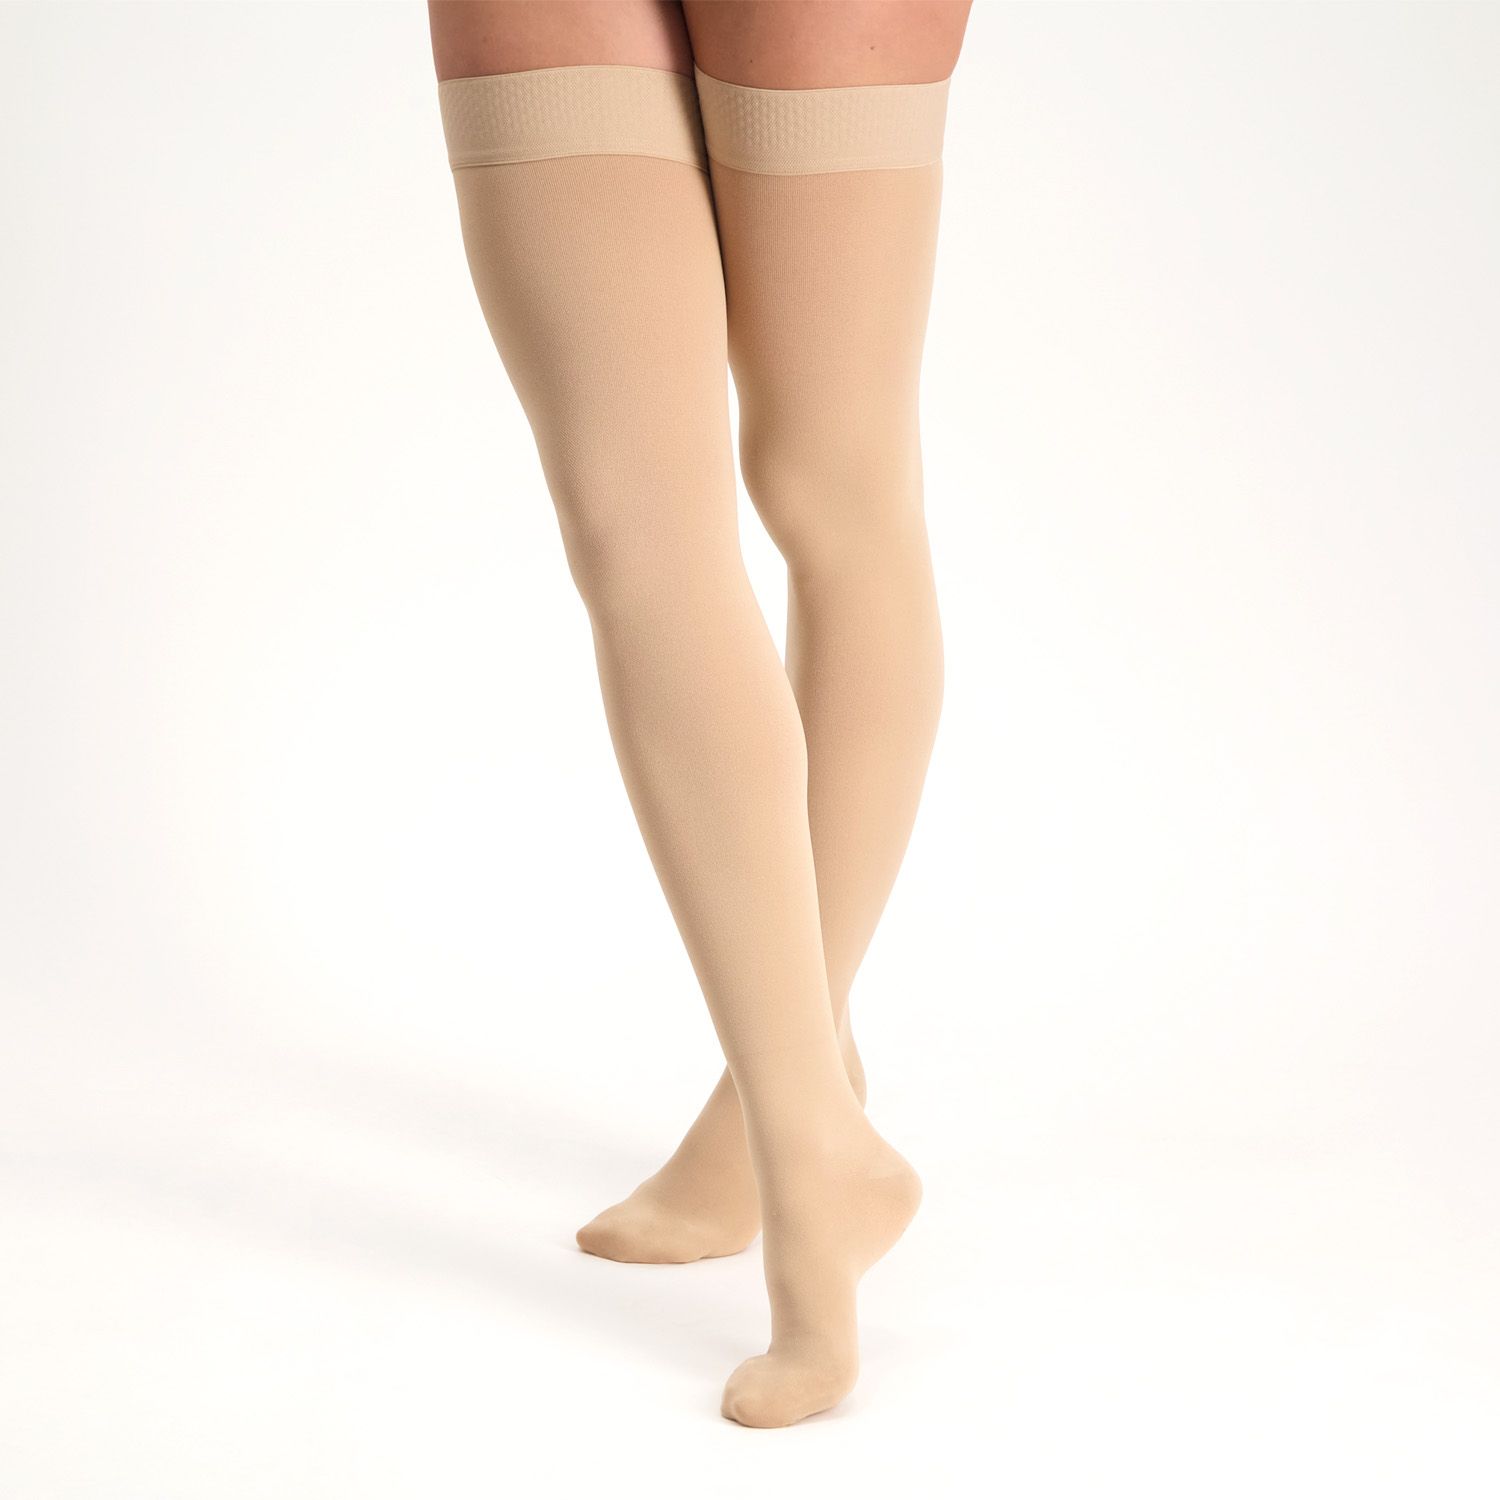 dunimed premium comfort compression stockings groin length closed toe with packaging